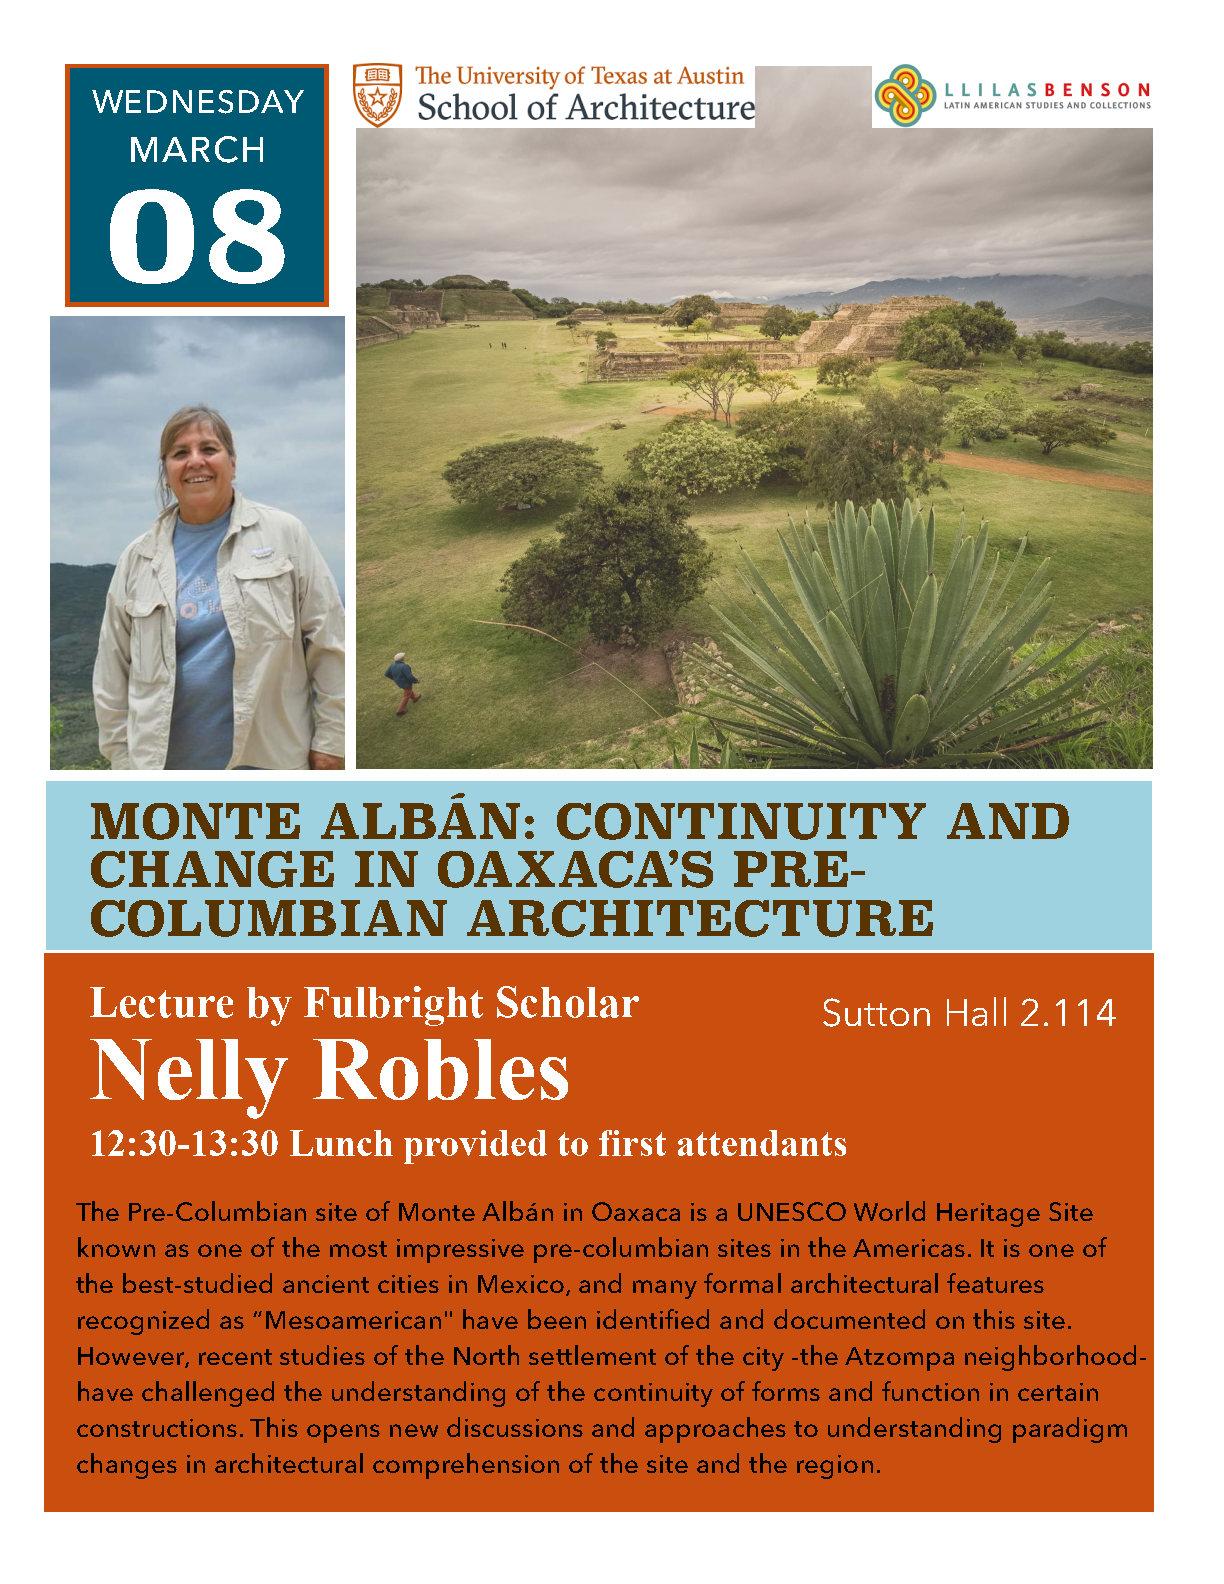 Nelly Robles Garcia Lecture Poster